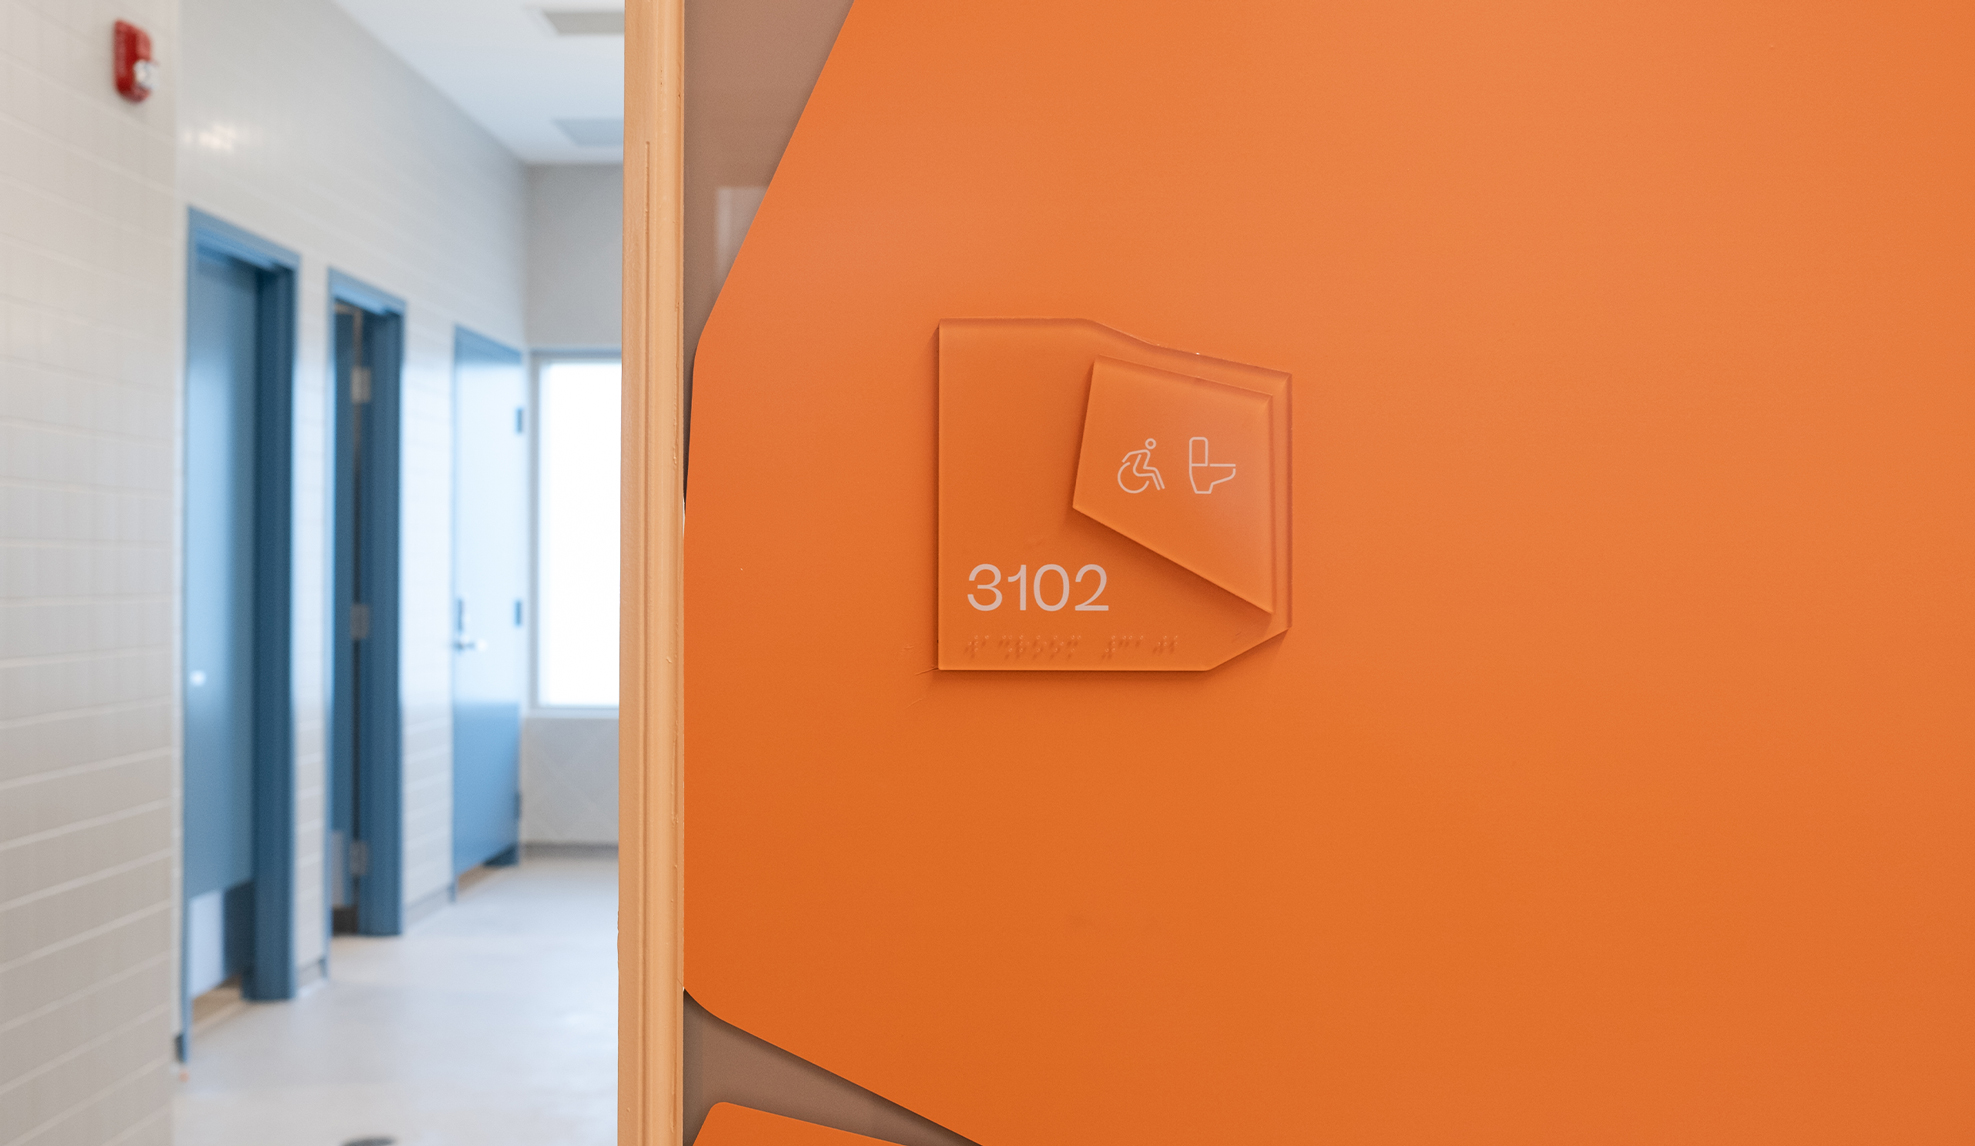 An orange wall sign on an orange wall in a rock-like shape that says "3102" and displays a wheelchair and toilet icon.